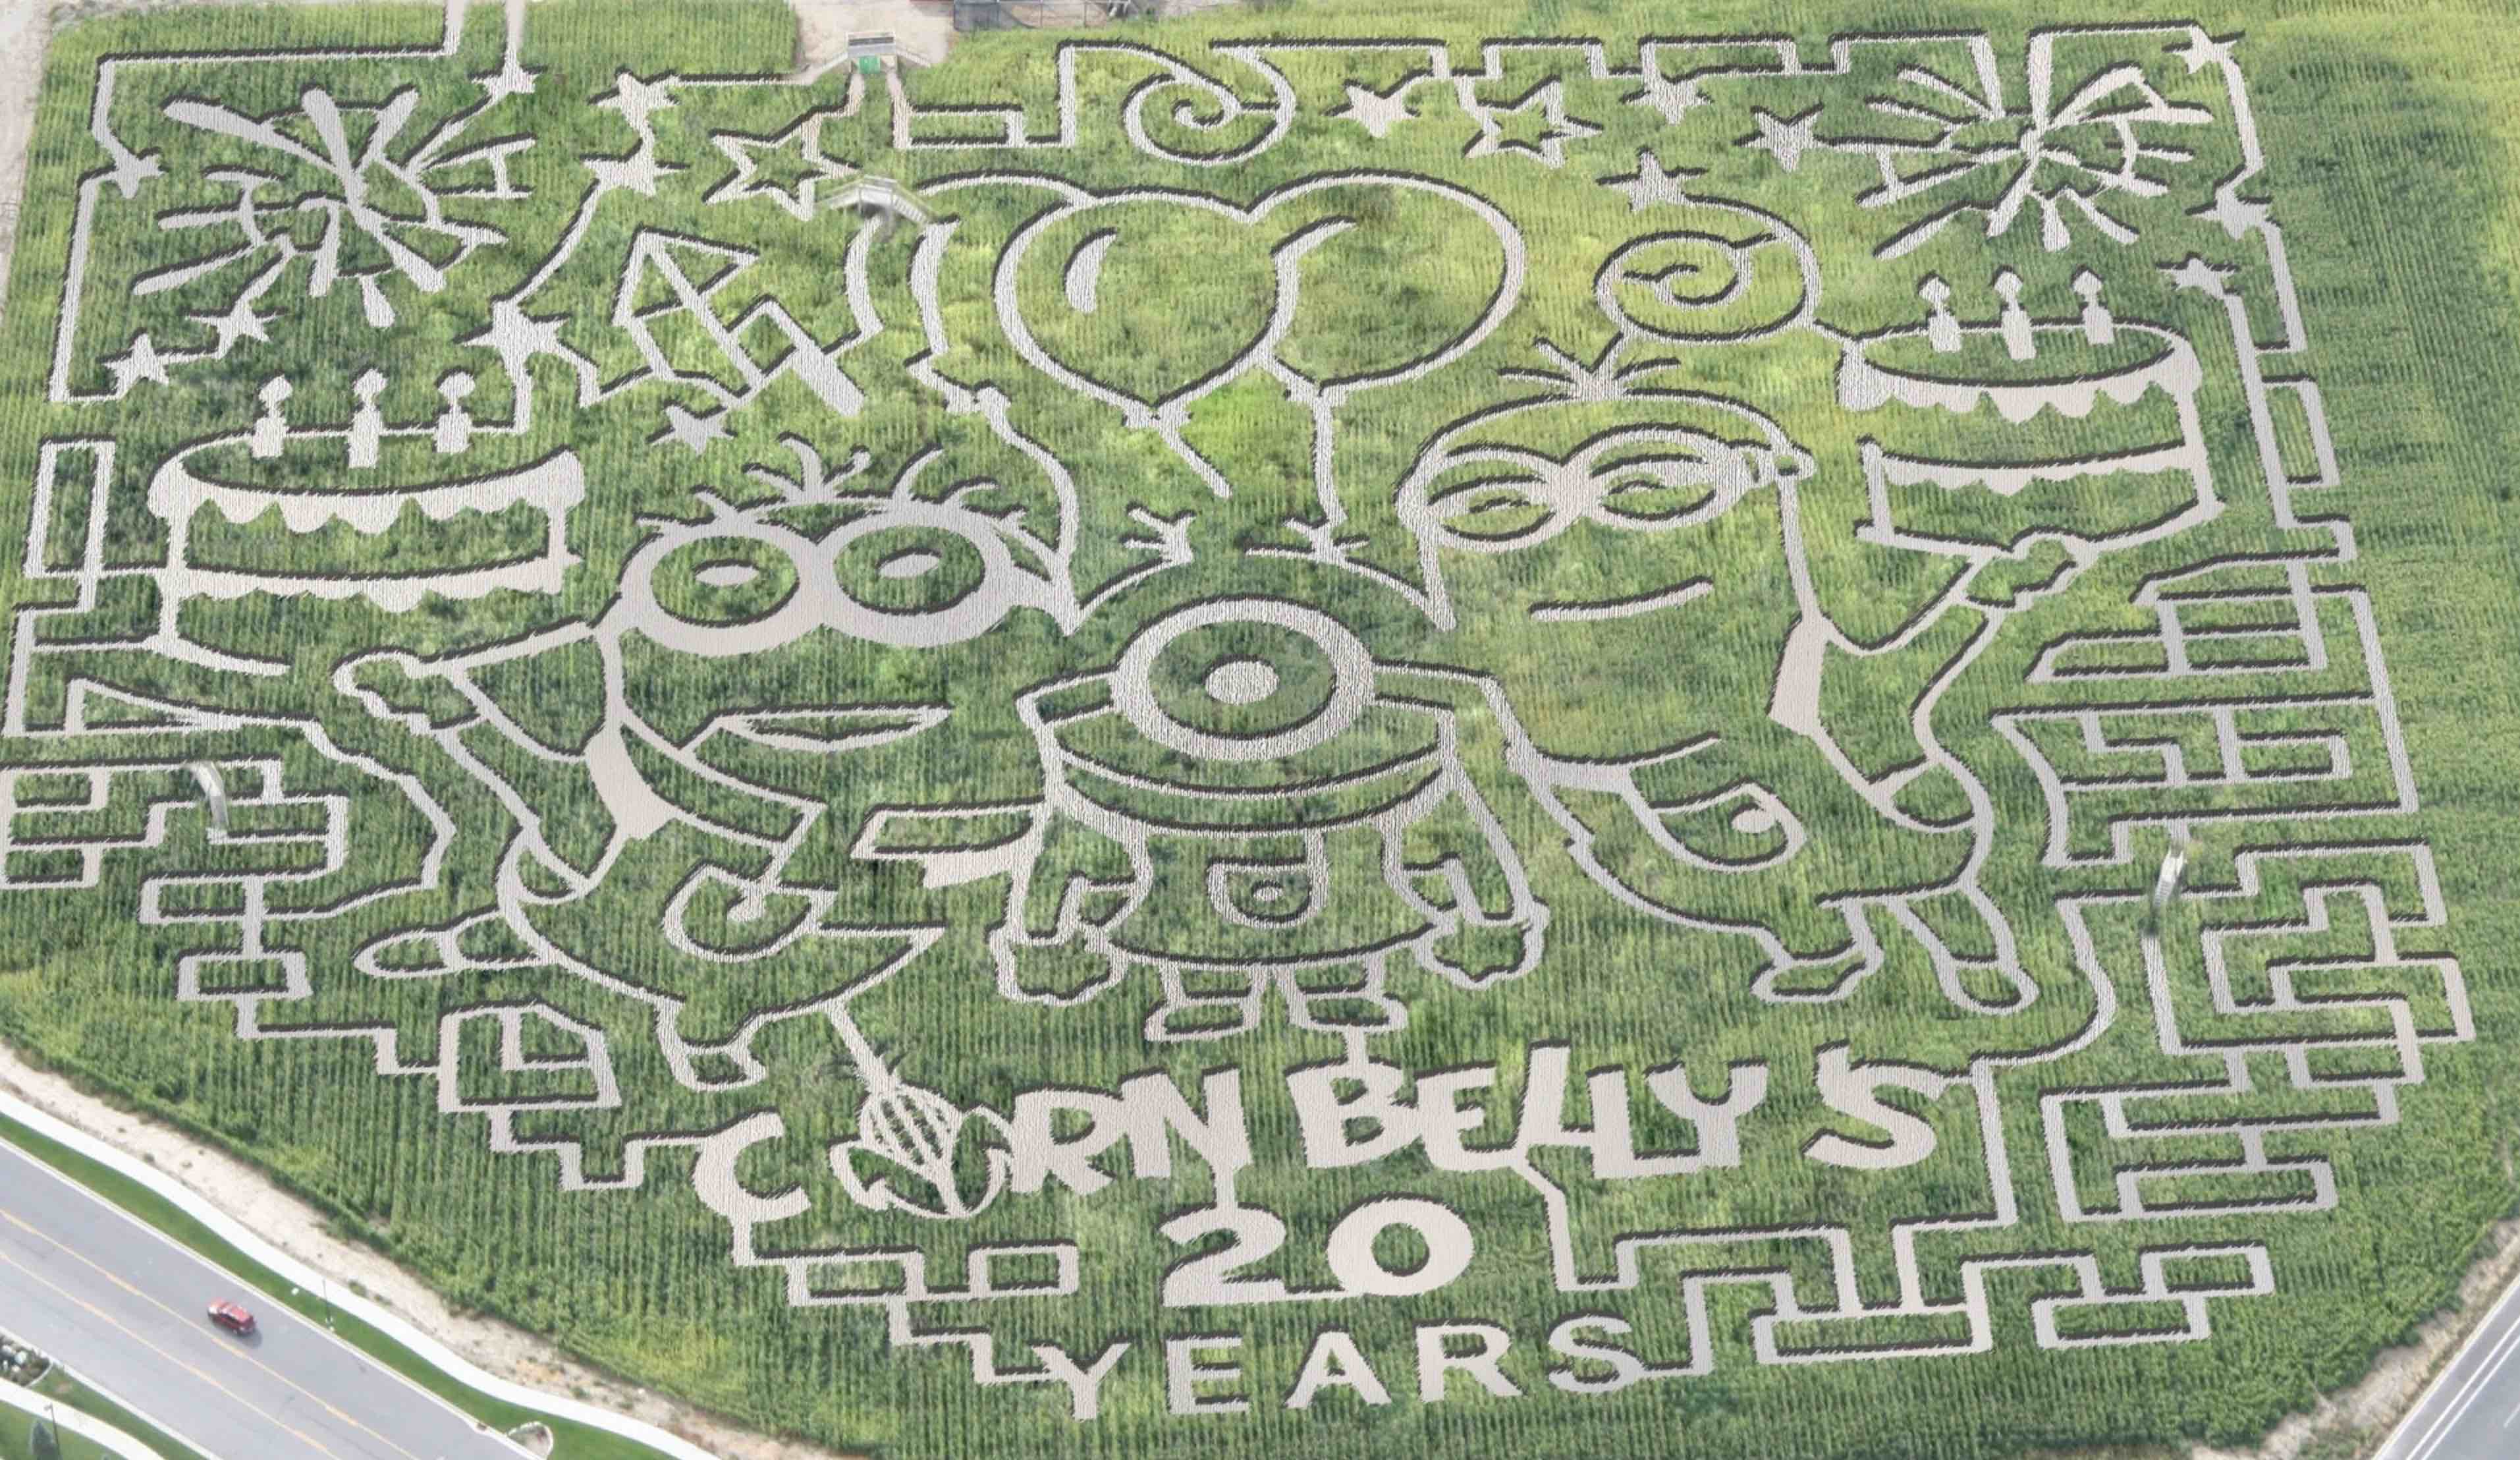 2015 - Lehi - Minions And 20 Years of Cornbelly's